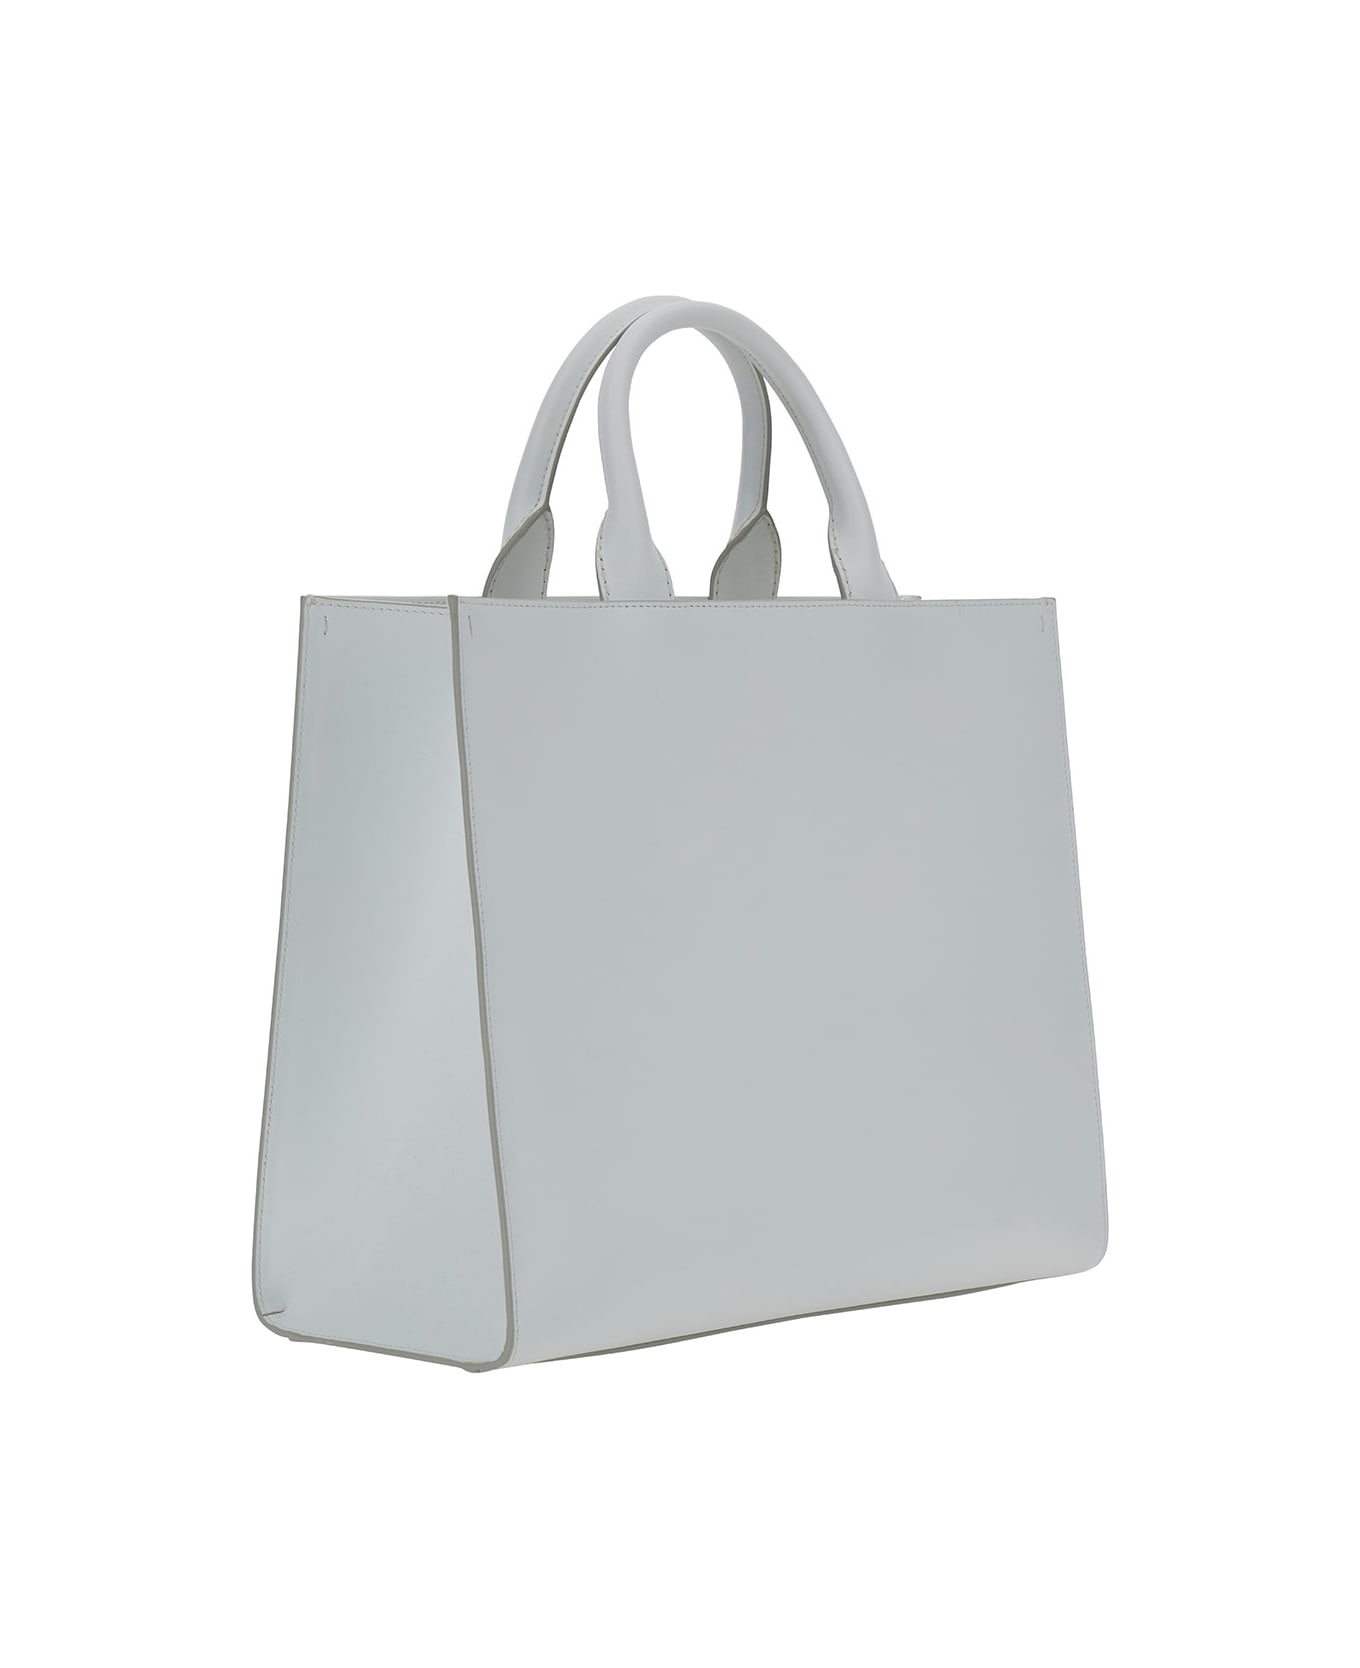 Dolce & Gabbana White Handbag With Tonal Dg Detail In Smooth Leather Woman - Bianco Ottico トートバッグ